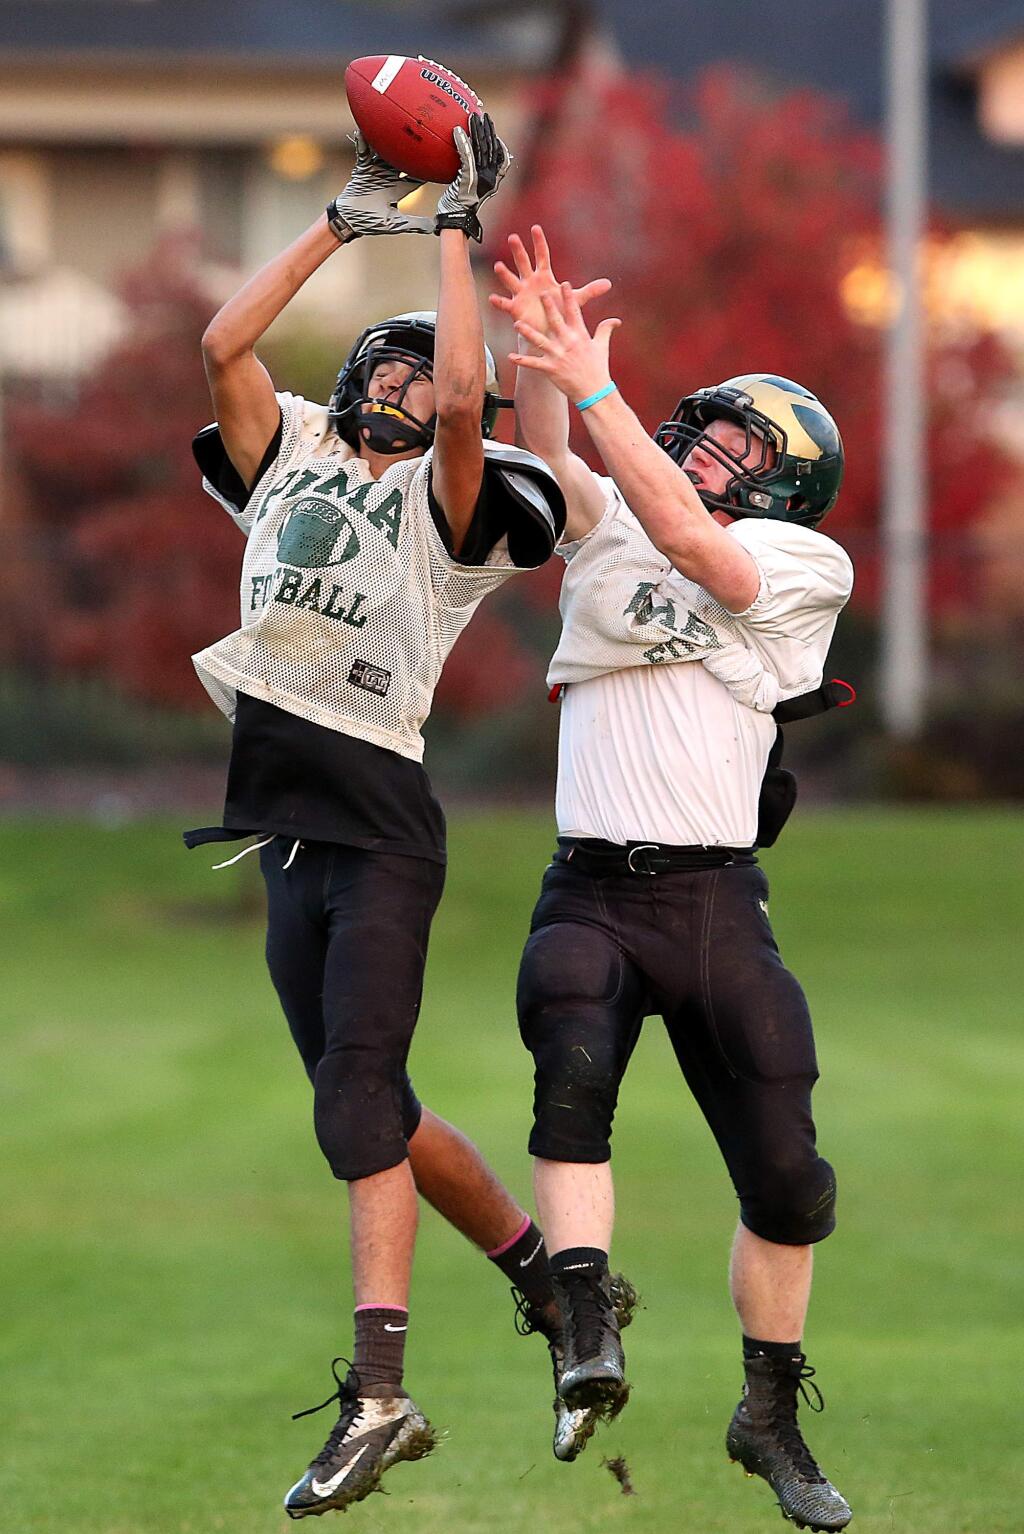 Maria Carrillo's Bailey Brown, left, goes up for the ball with Josh Groesbeck during the football practice held at Maria Carrillo High School, Thursday, November 20, 2014. (Crista Jeremiason / The Press Democrat)